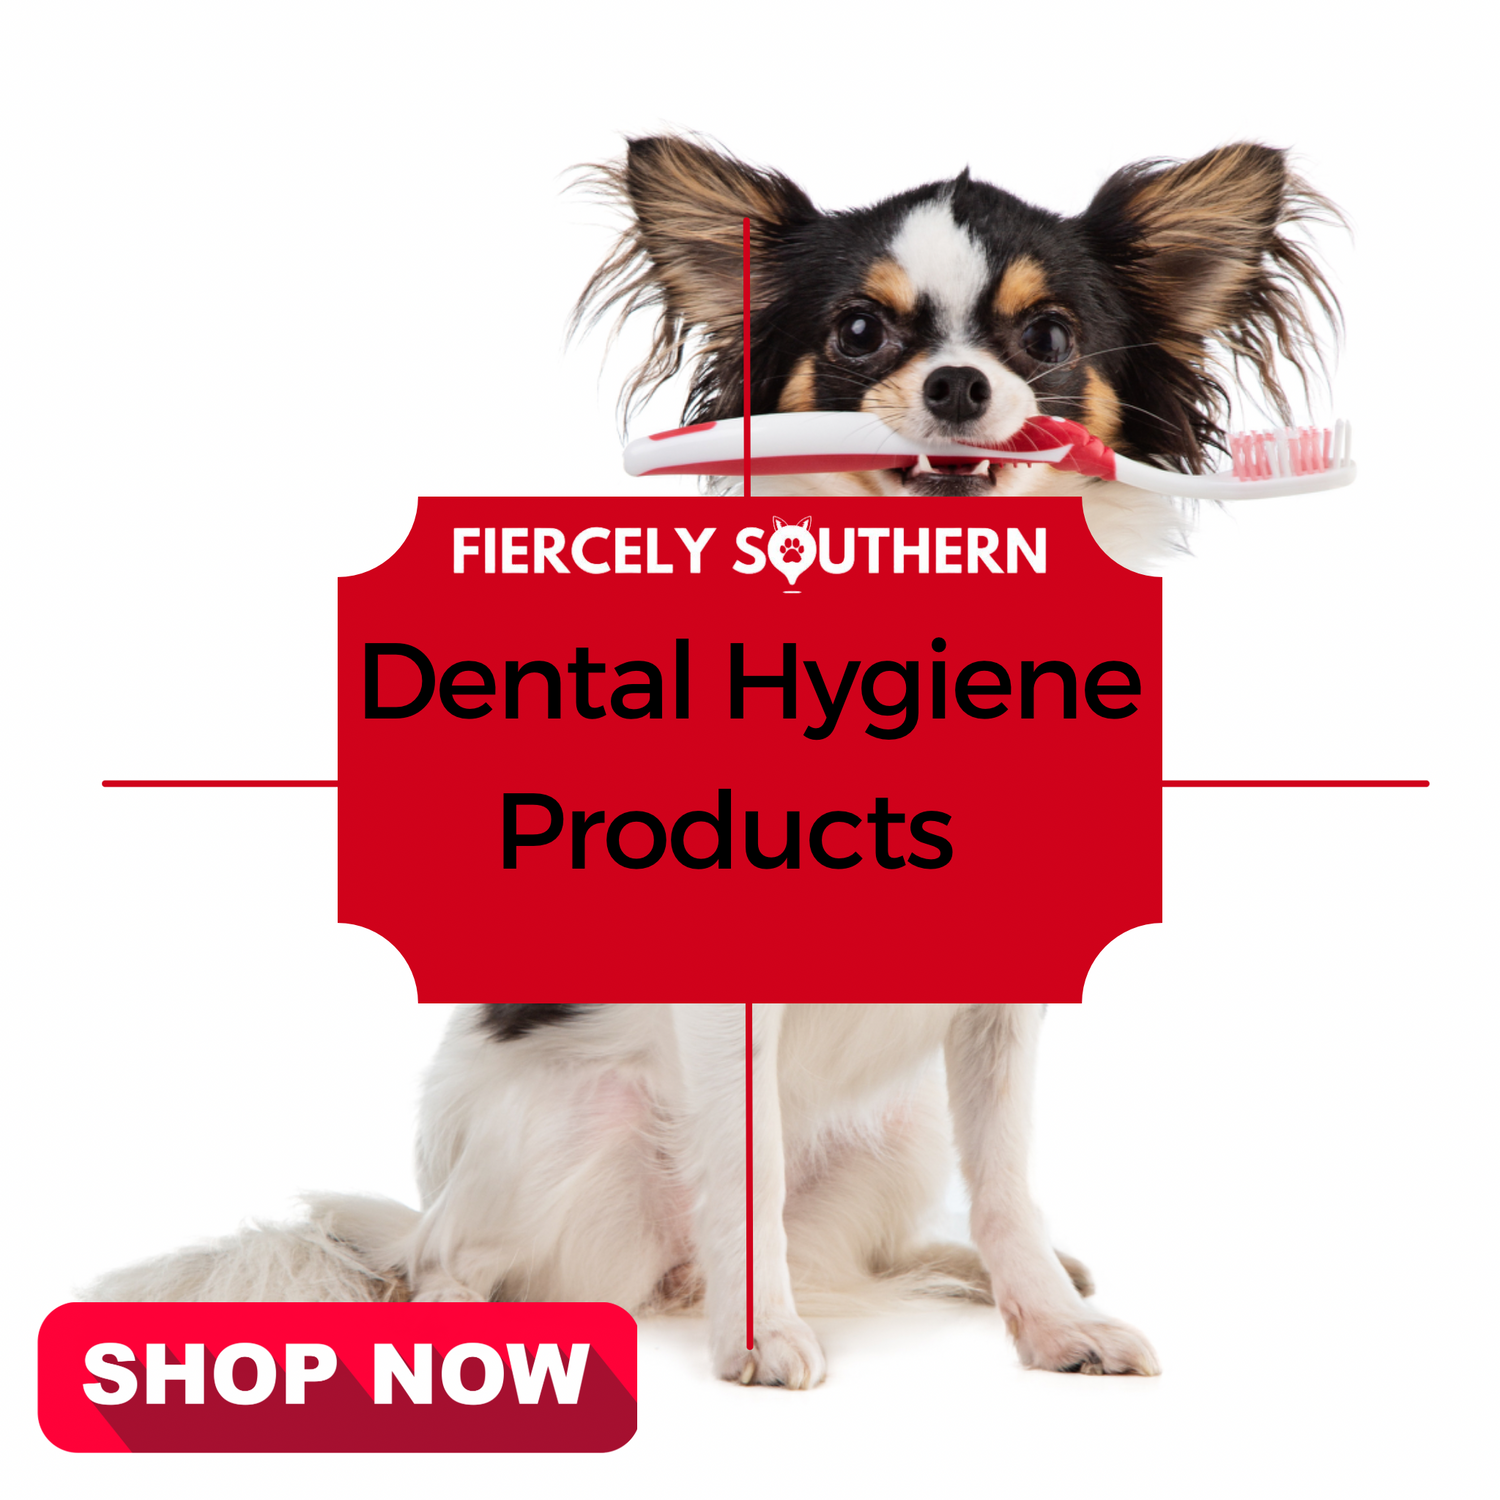 Dental Hygiene Products - Fiercely Southern